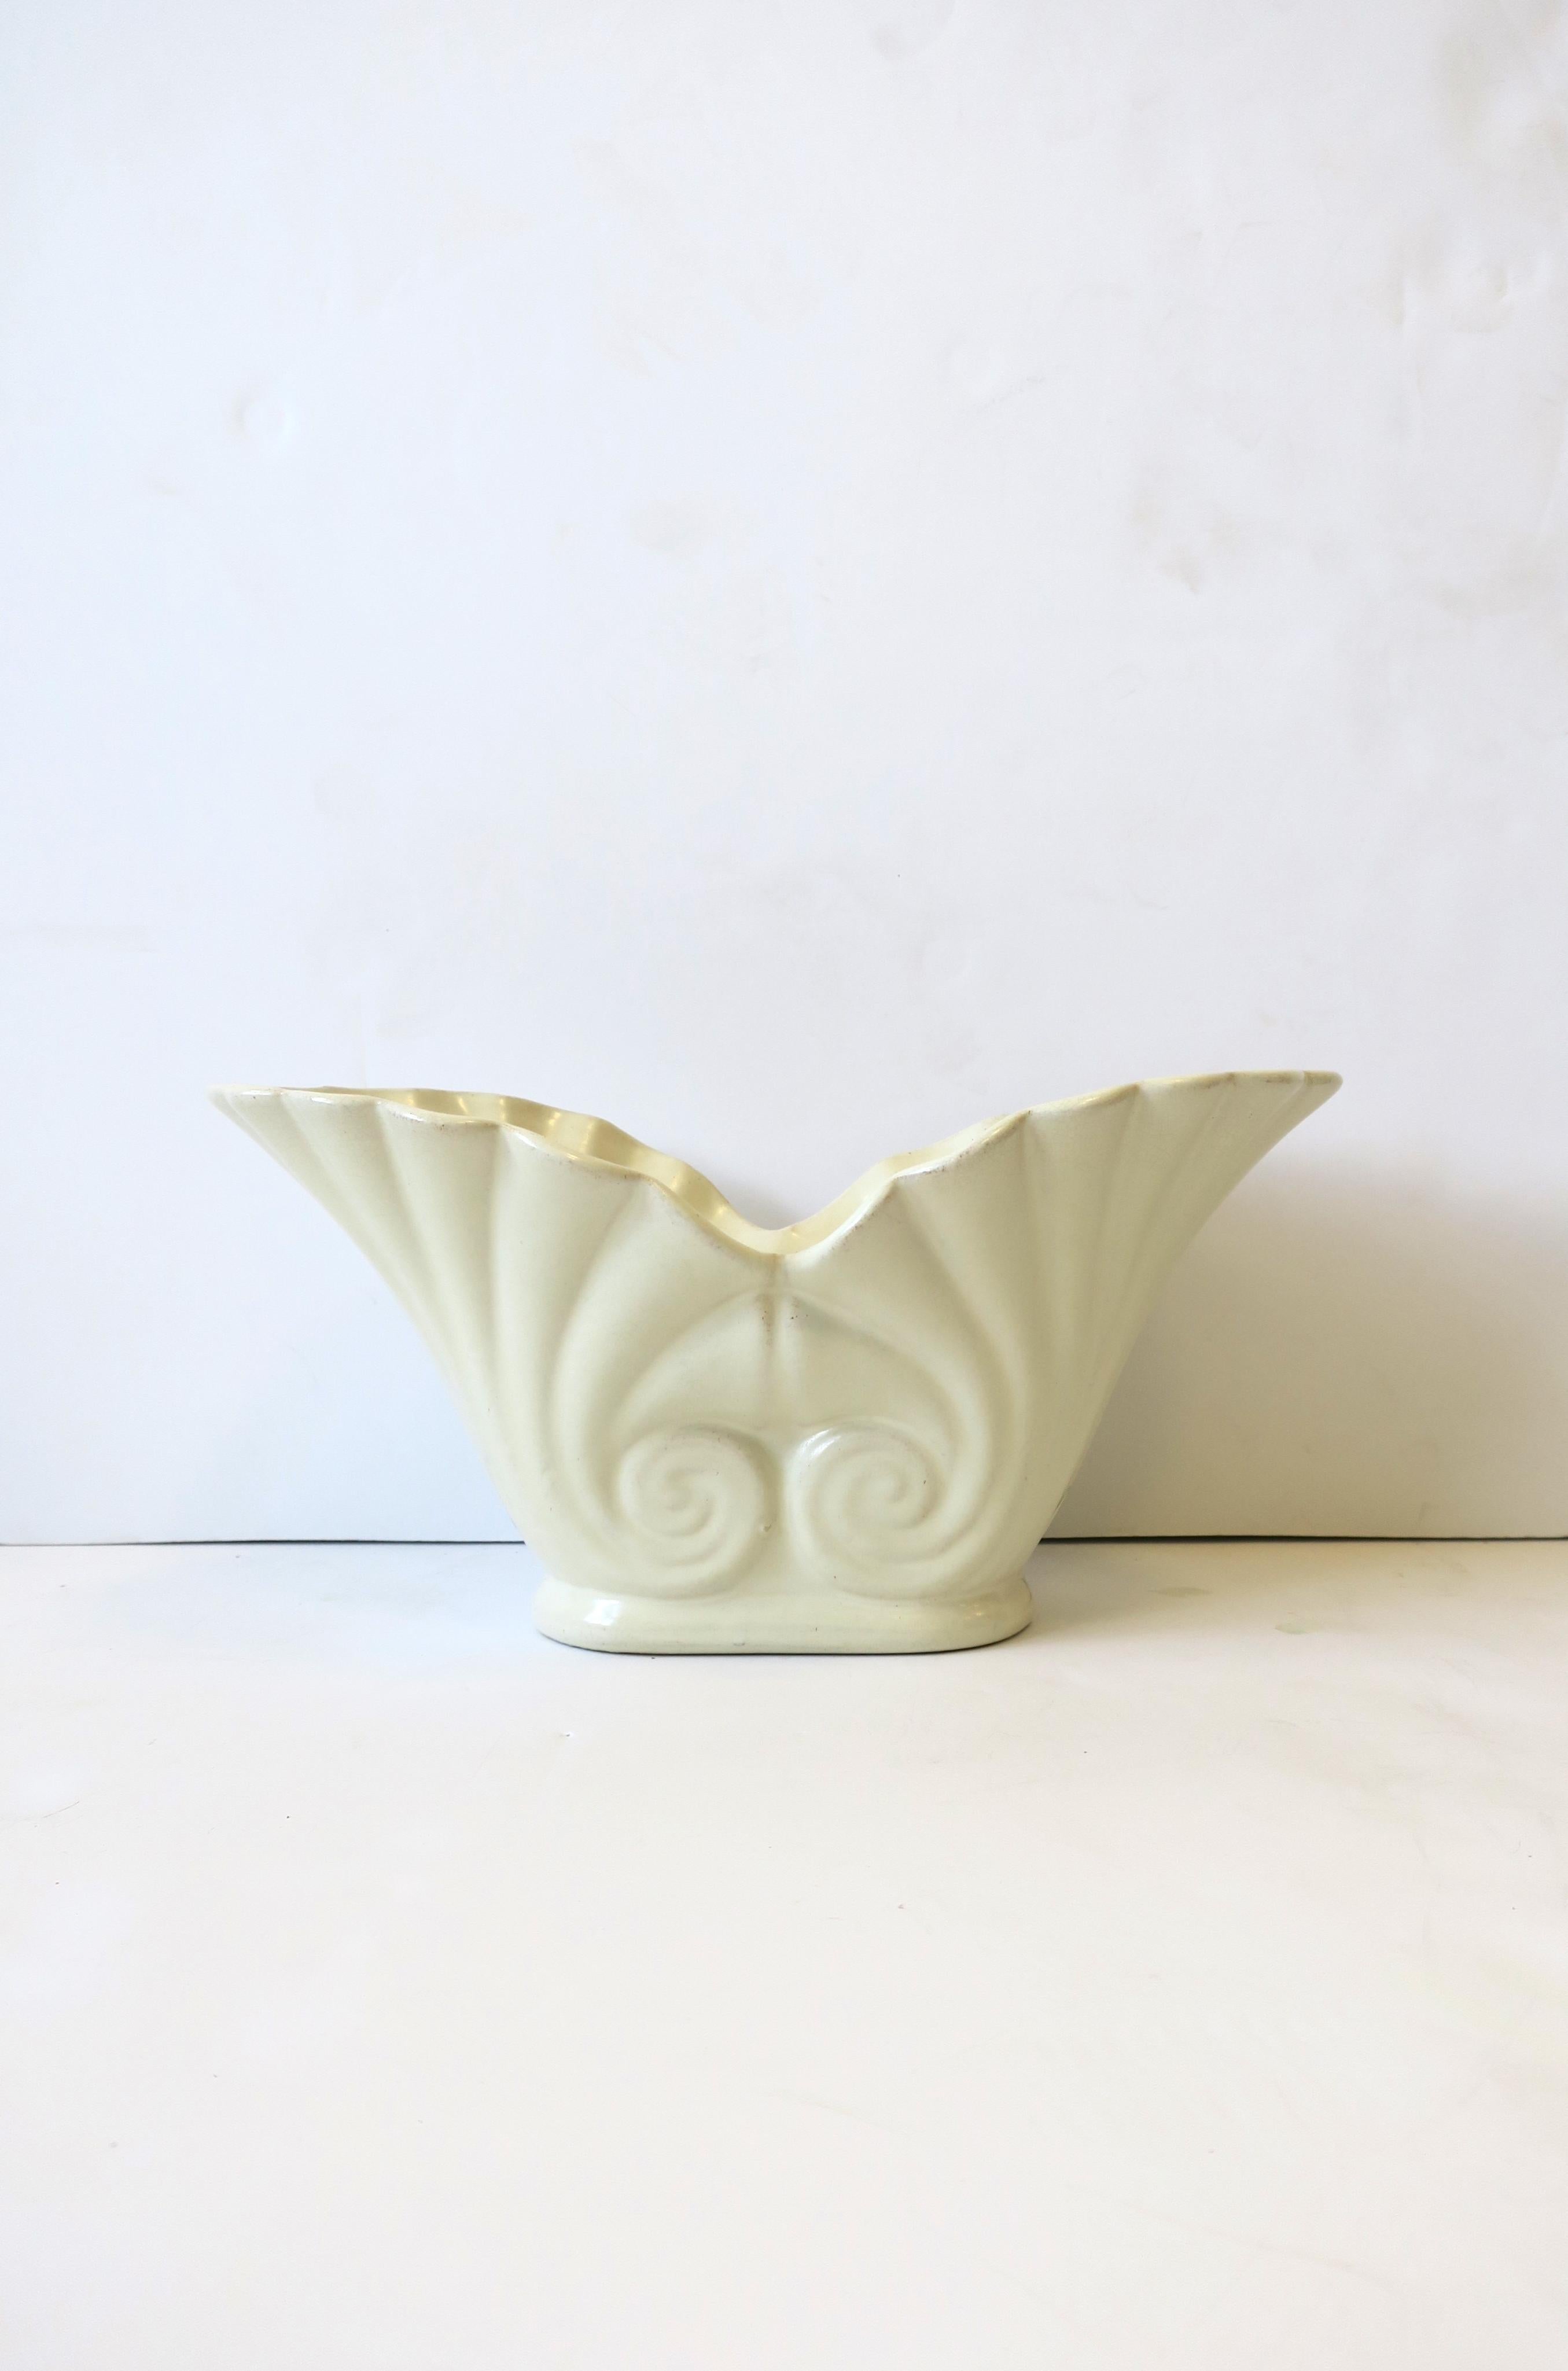 A cream off-white ceramic cachepot jardiniere plant or flowerpot holder with nautilus seashell design and scalloped edge, Art Deco period, circa early-20th century. Beautiful with or without plant/flower. No chips noted. Dimensions: 6.25